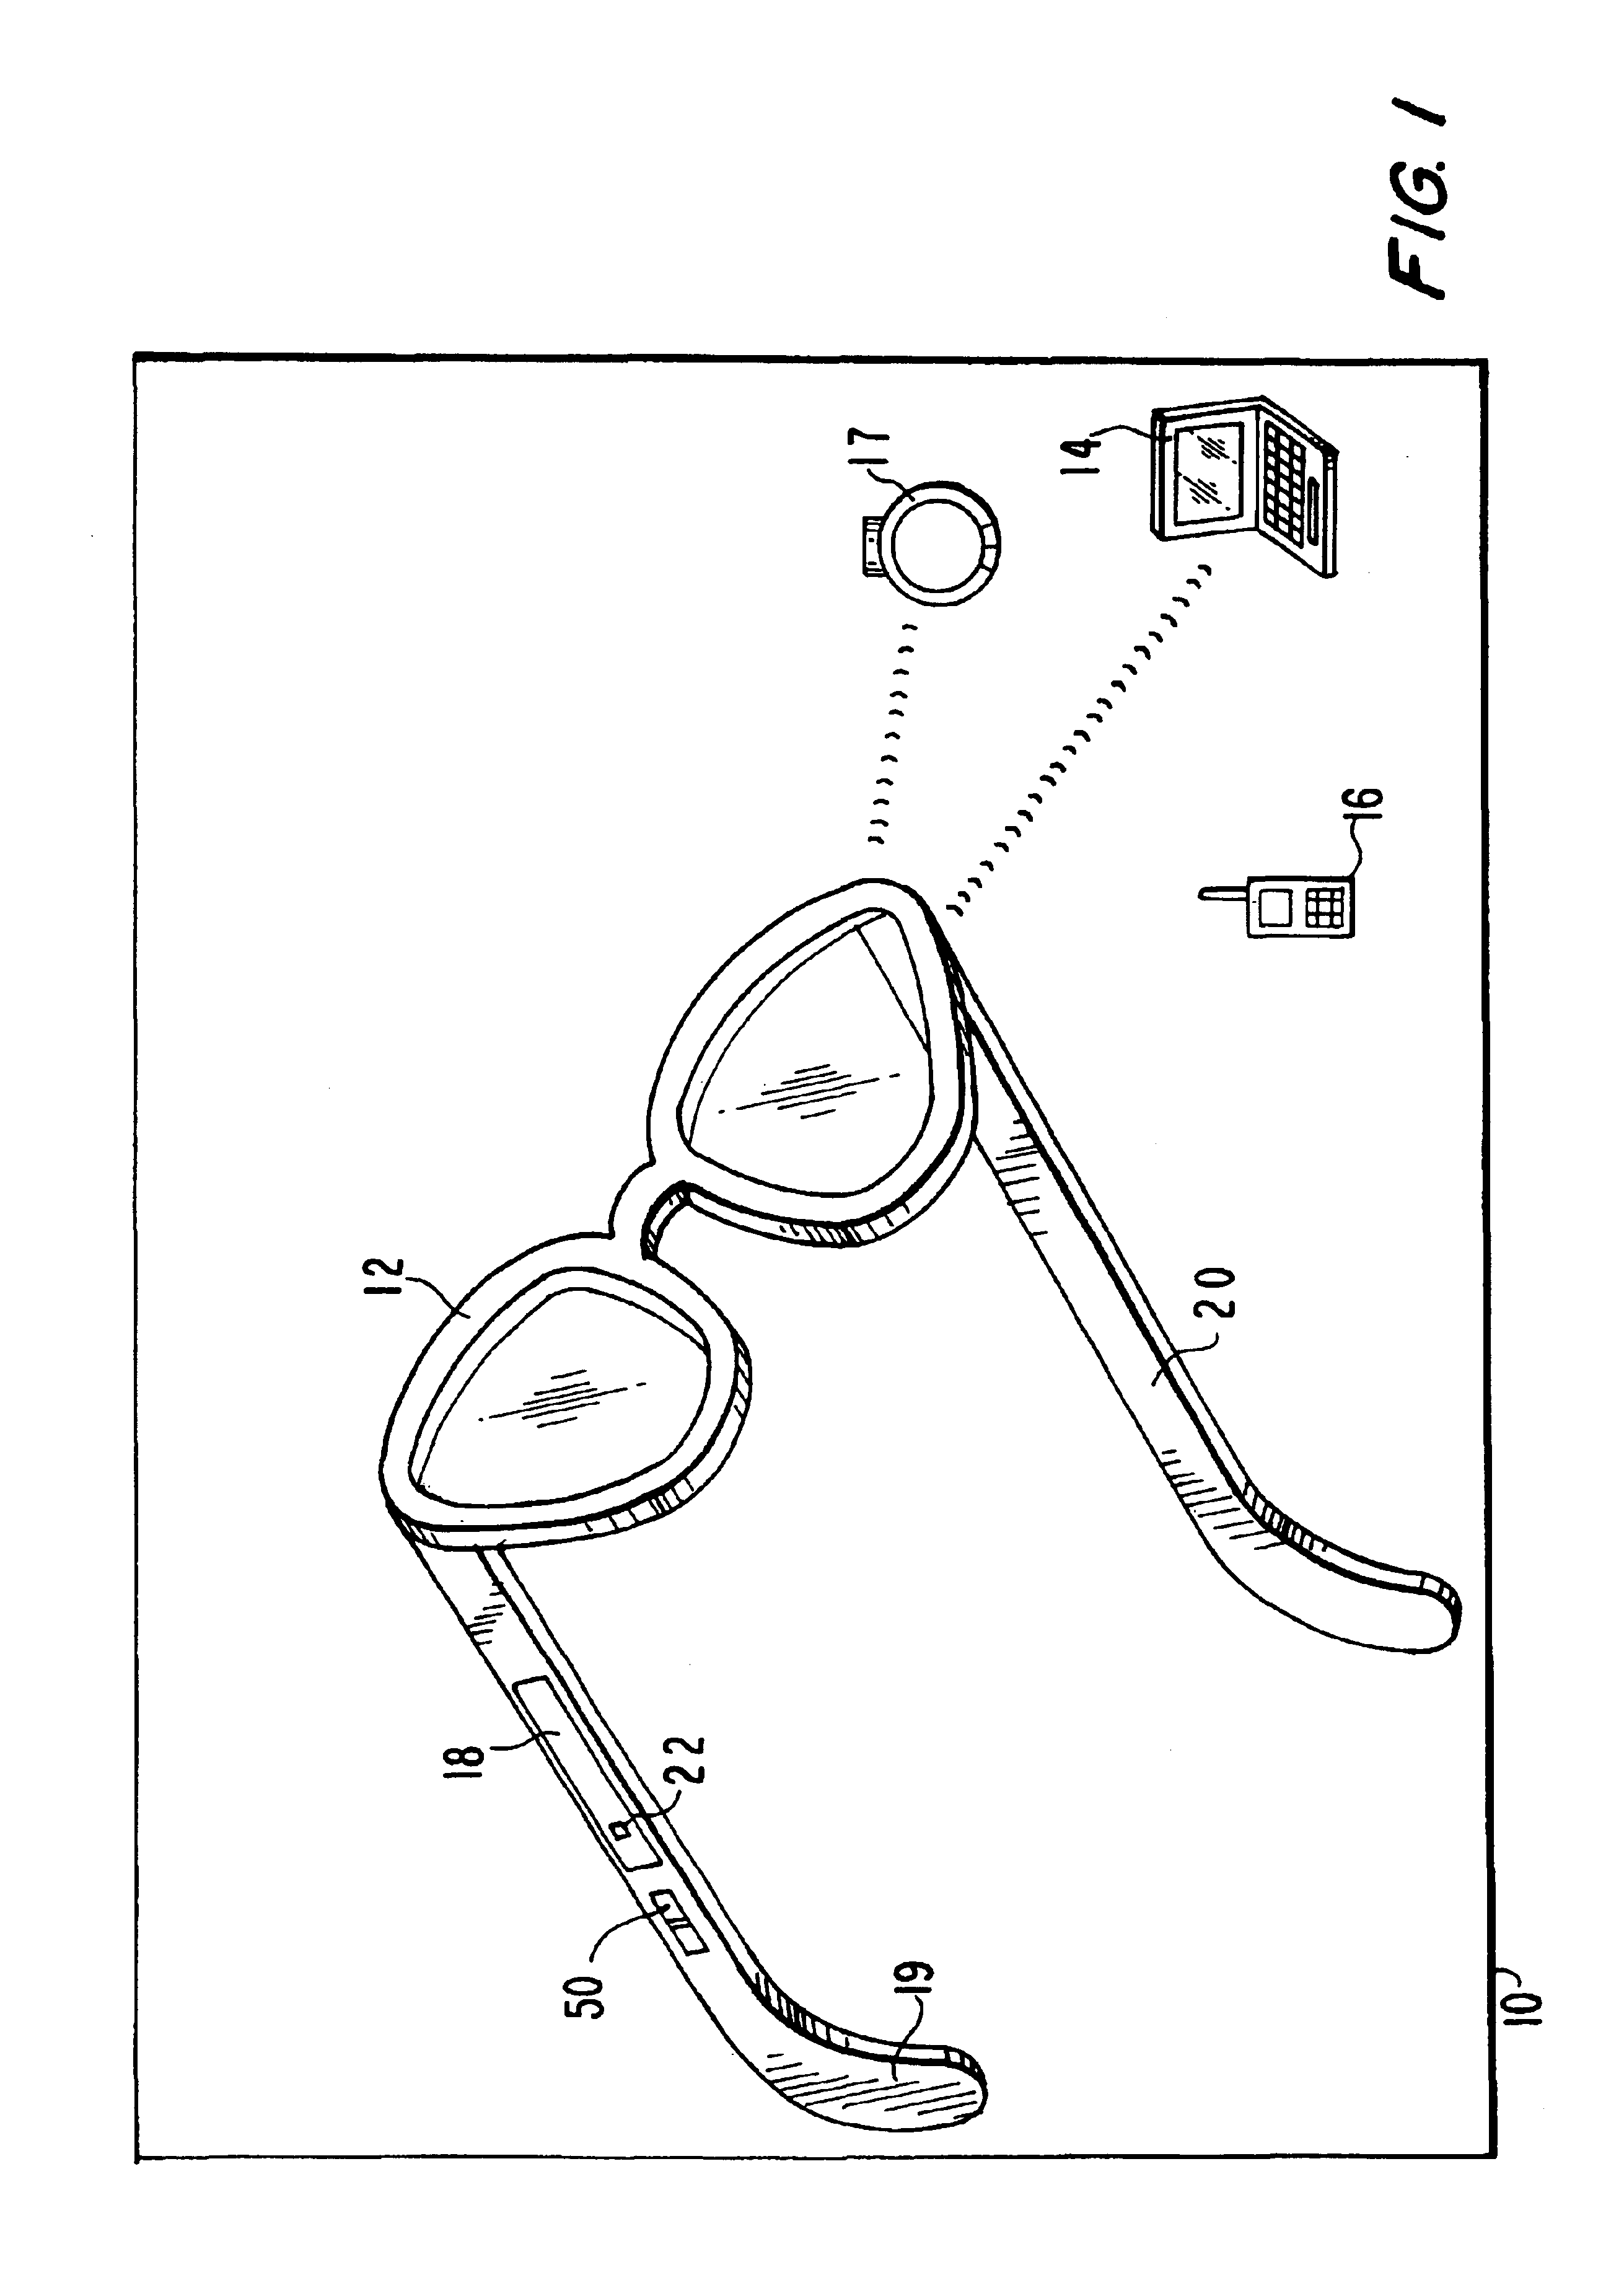 Eyewear with exchangeable temples housing bluetooth enable apparatus